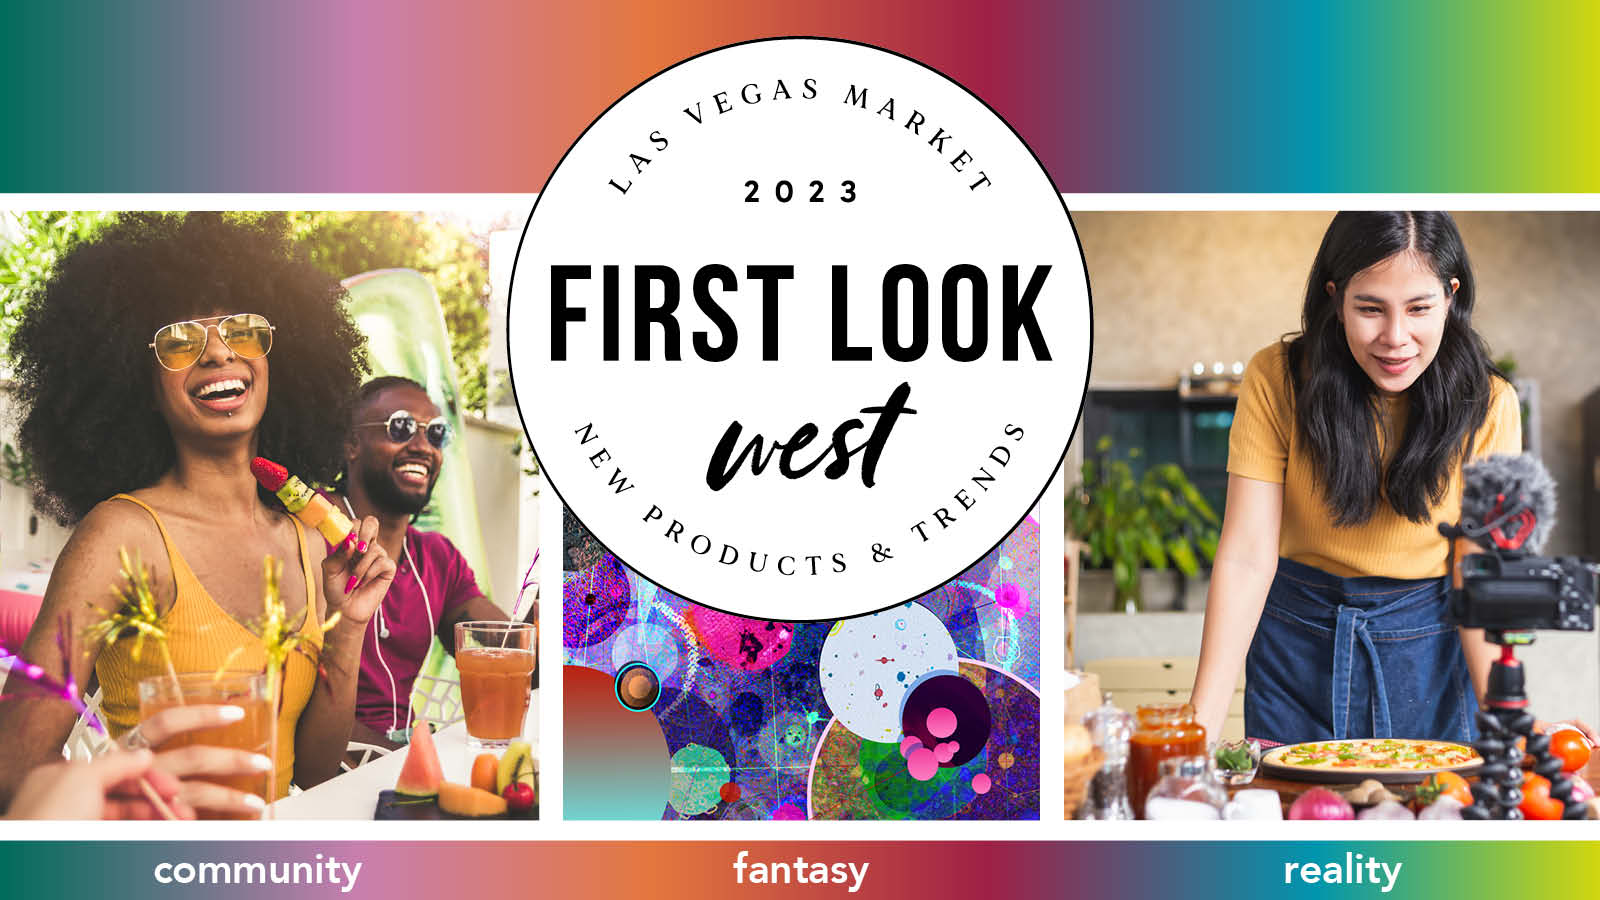 First Look West at Las Vegas Market